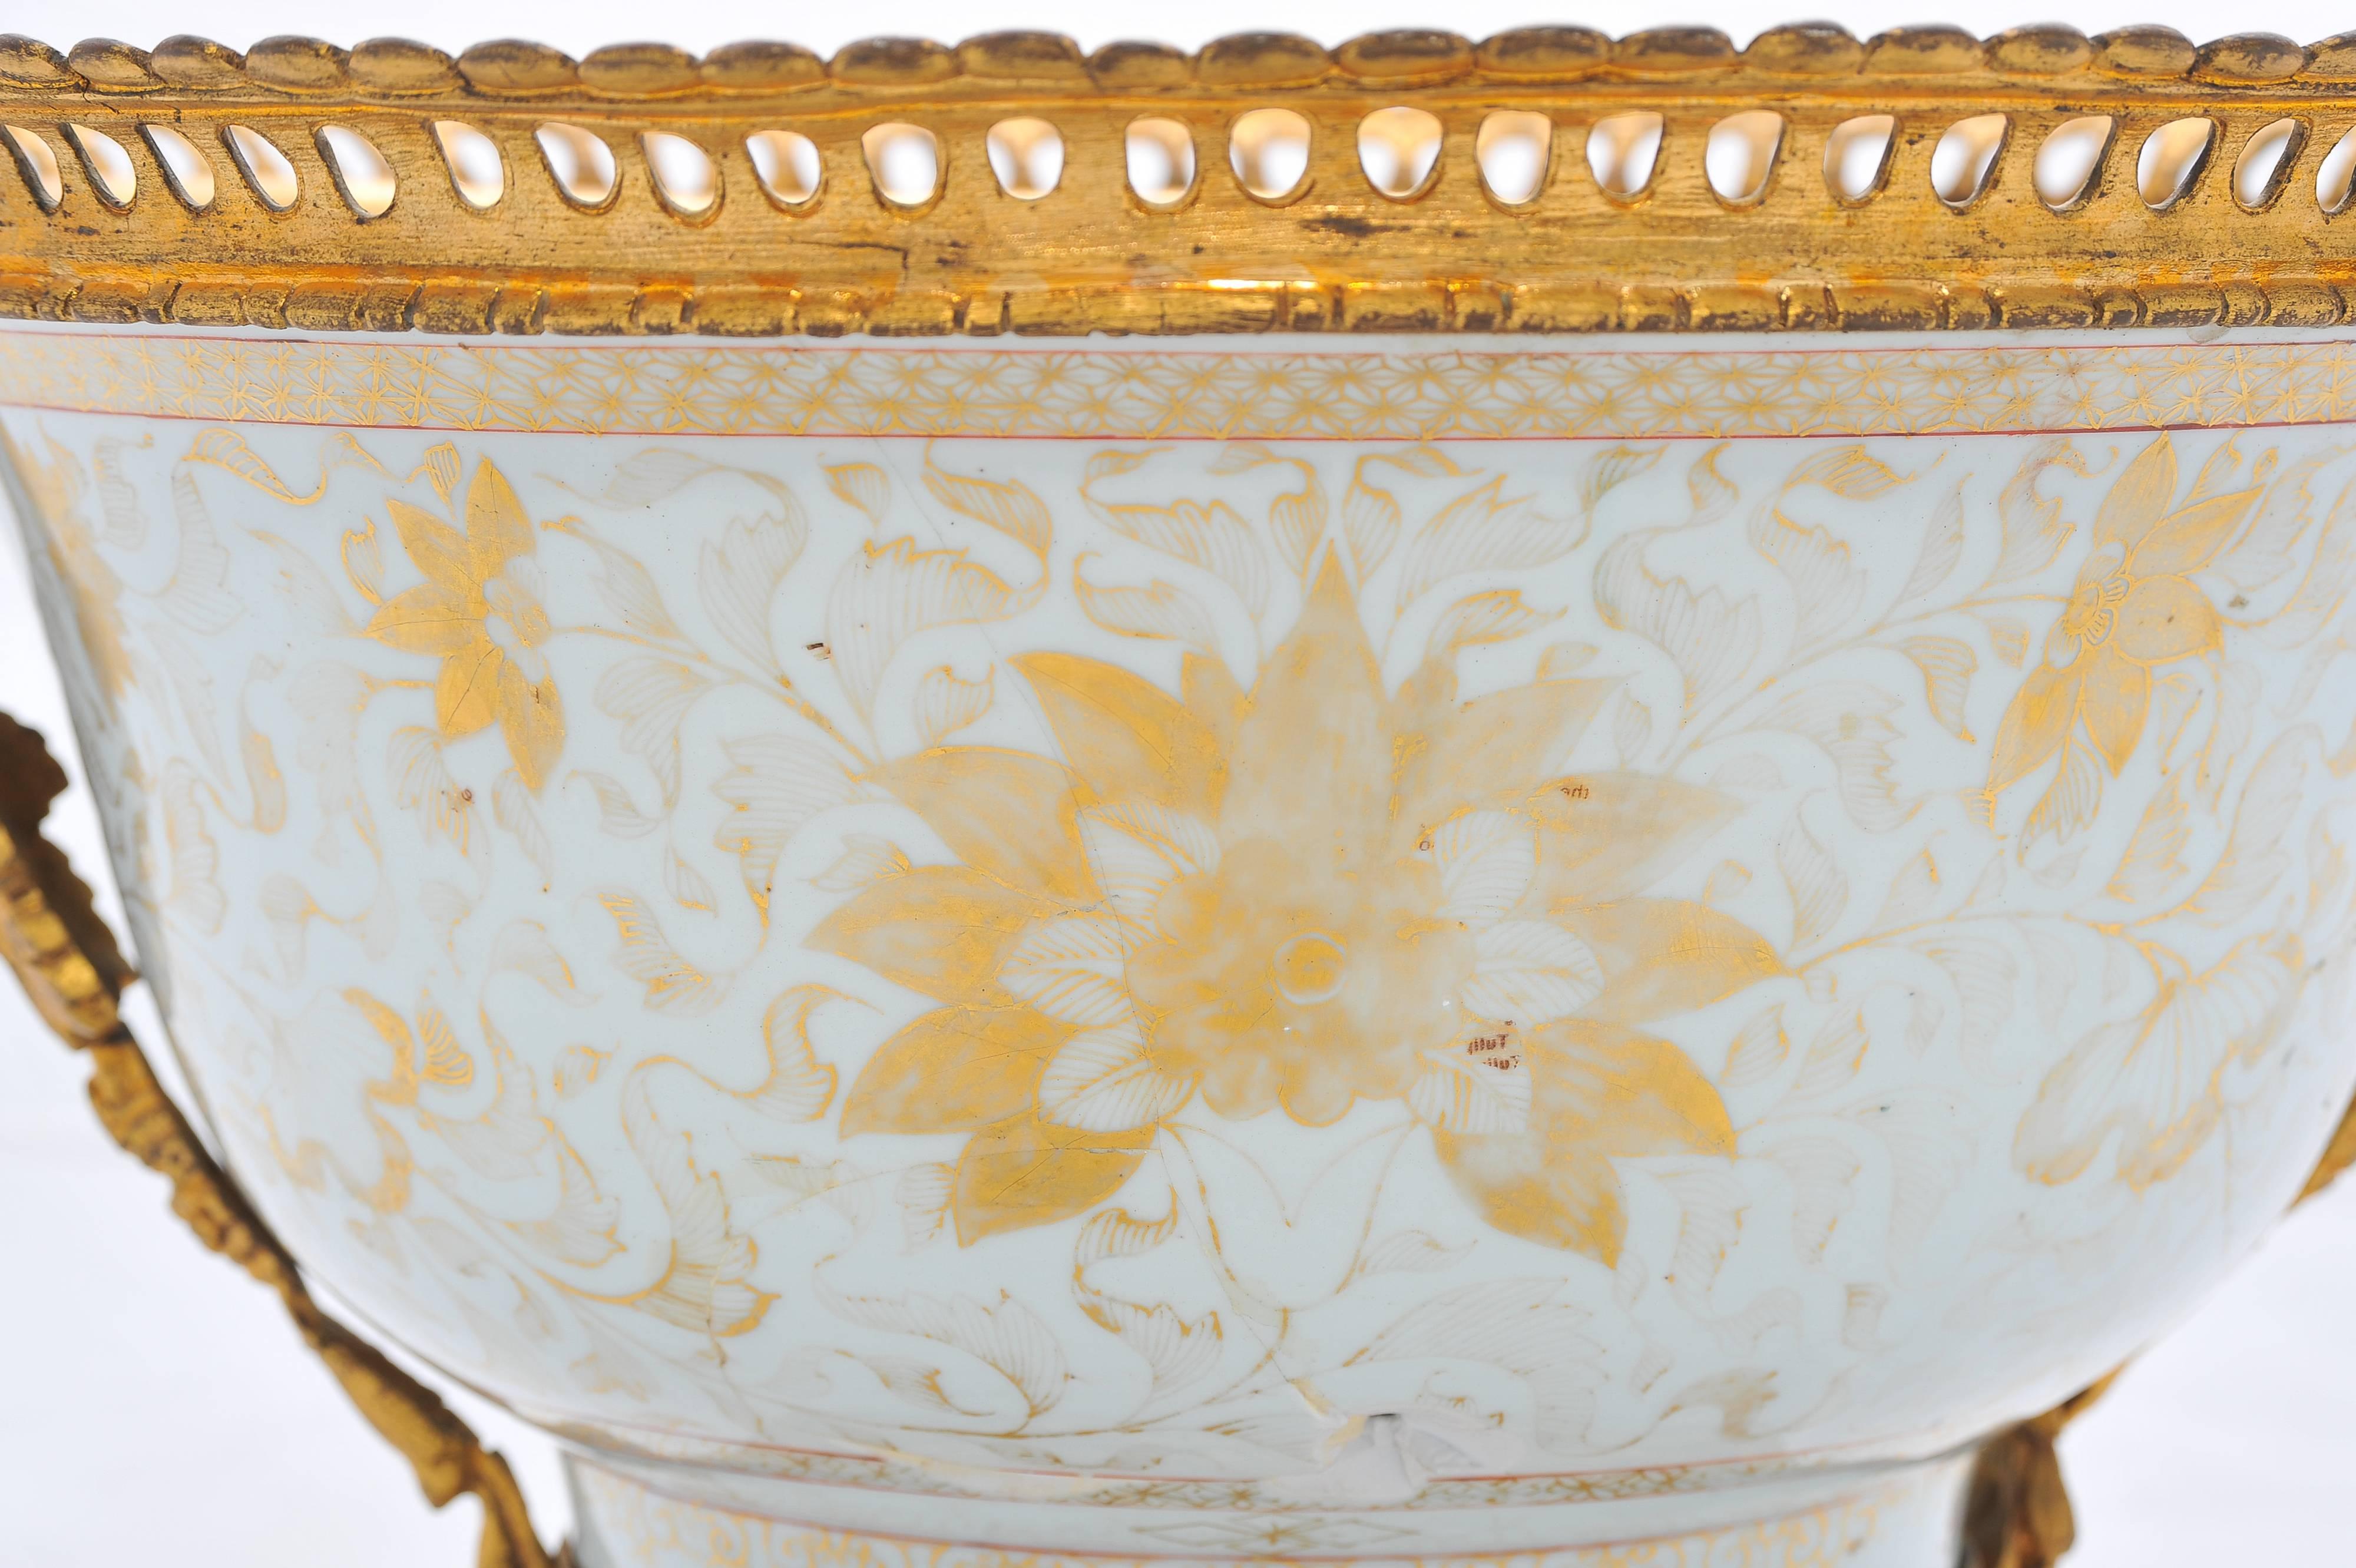 A very impressive 18th century Chinese export porcelain bowl, having gilded floral decoration, wonderful gilded ormolu handles and base with scrolling foliate detail.